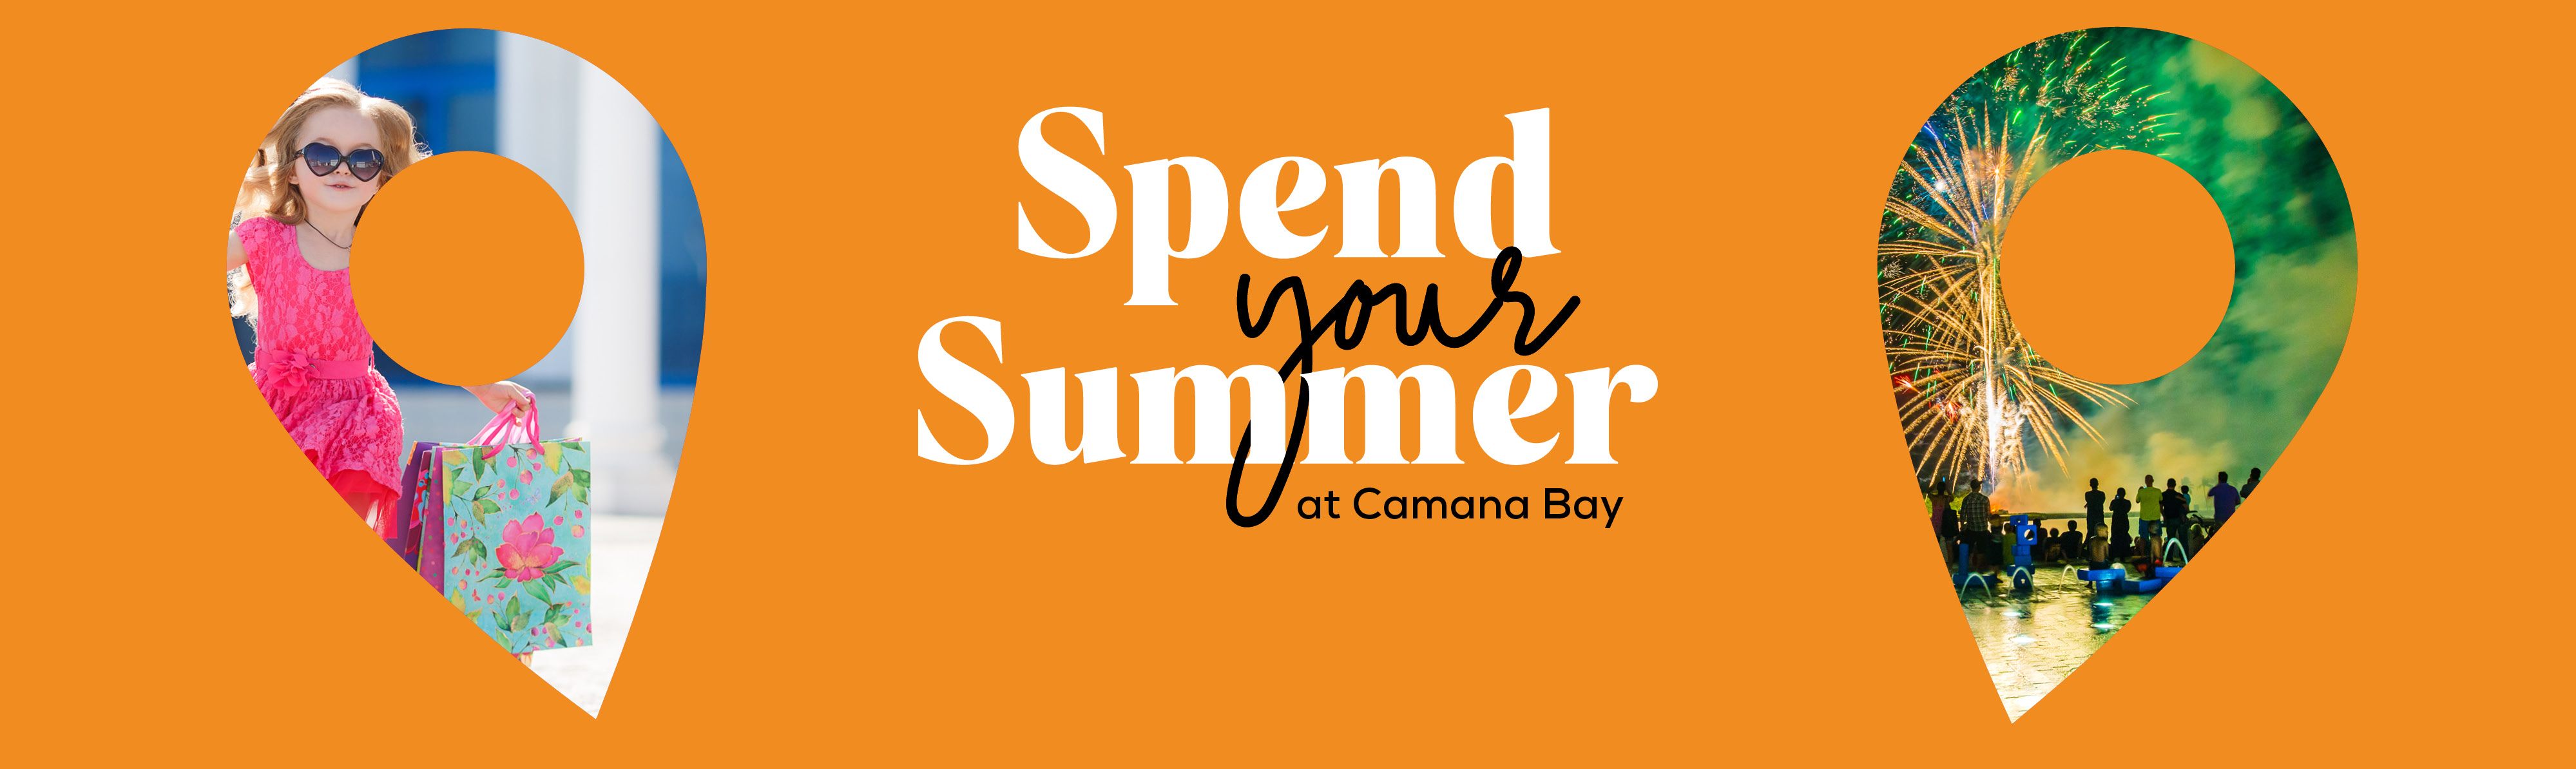 Spend your summer at Camana Bay